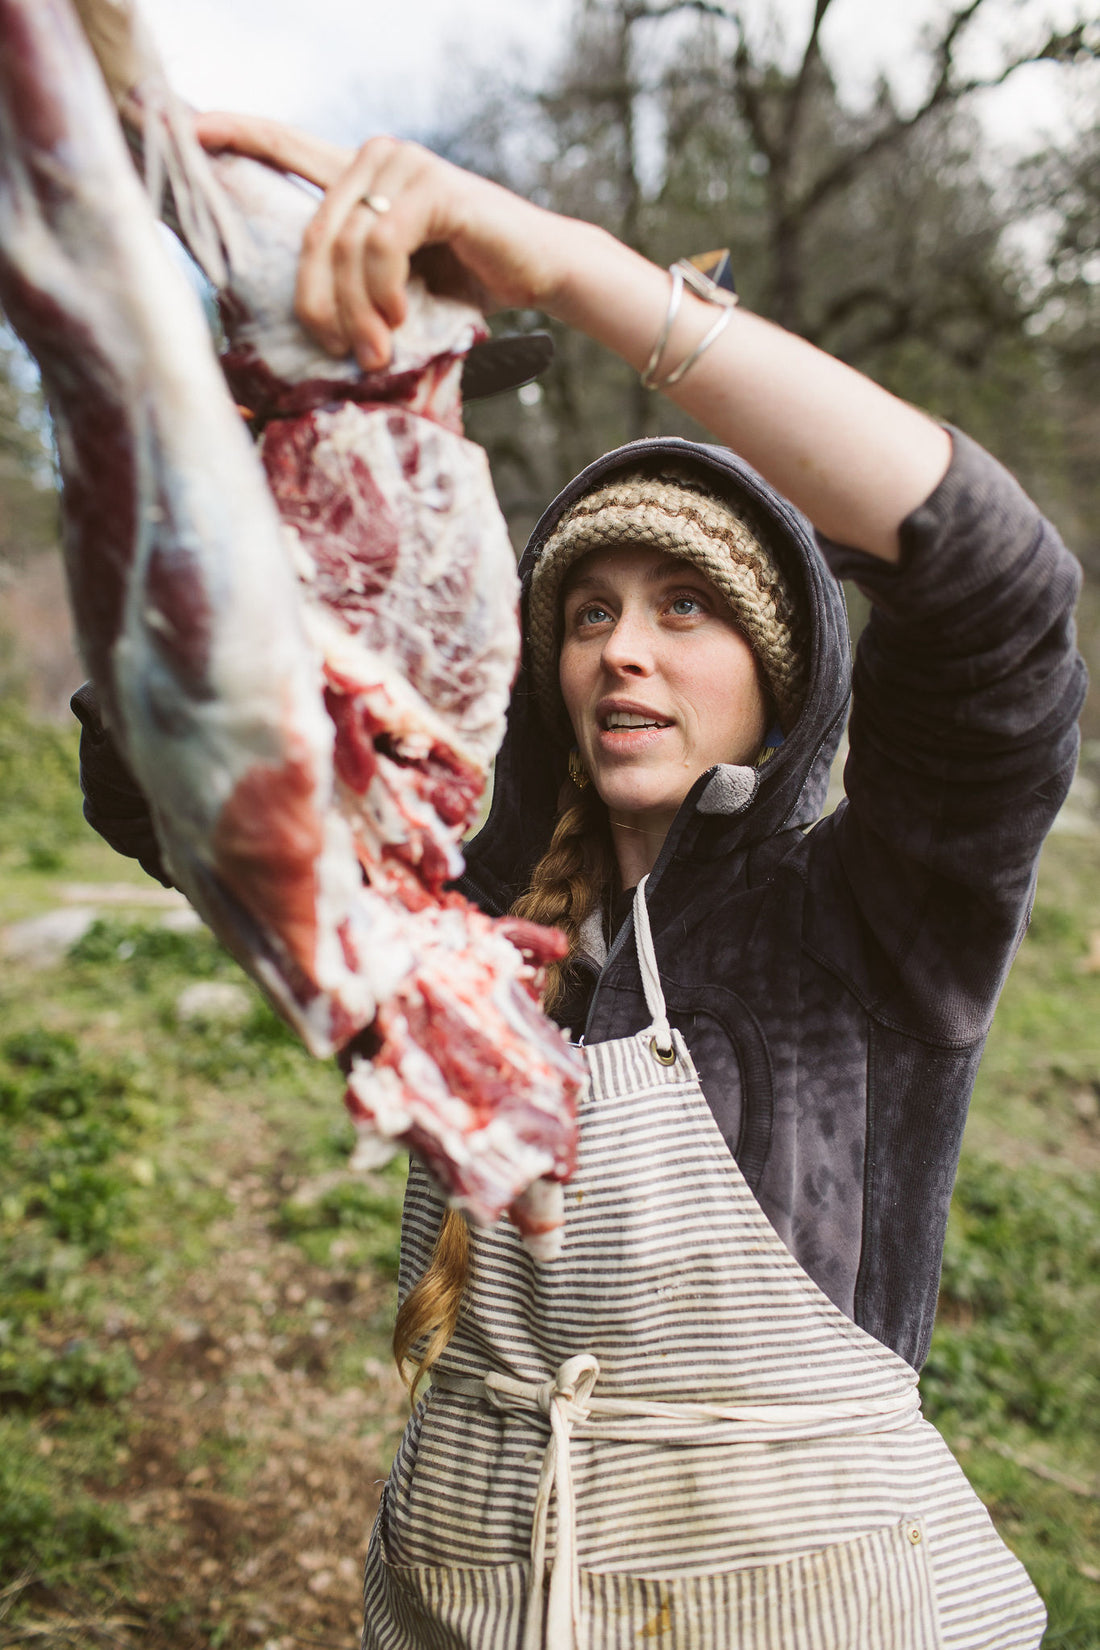 Eeating Meat Again: Recovering from Veganism and Vegetarianism